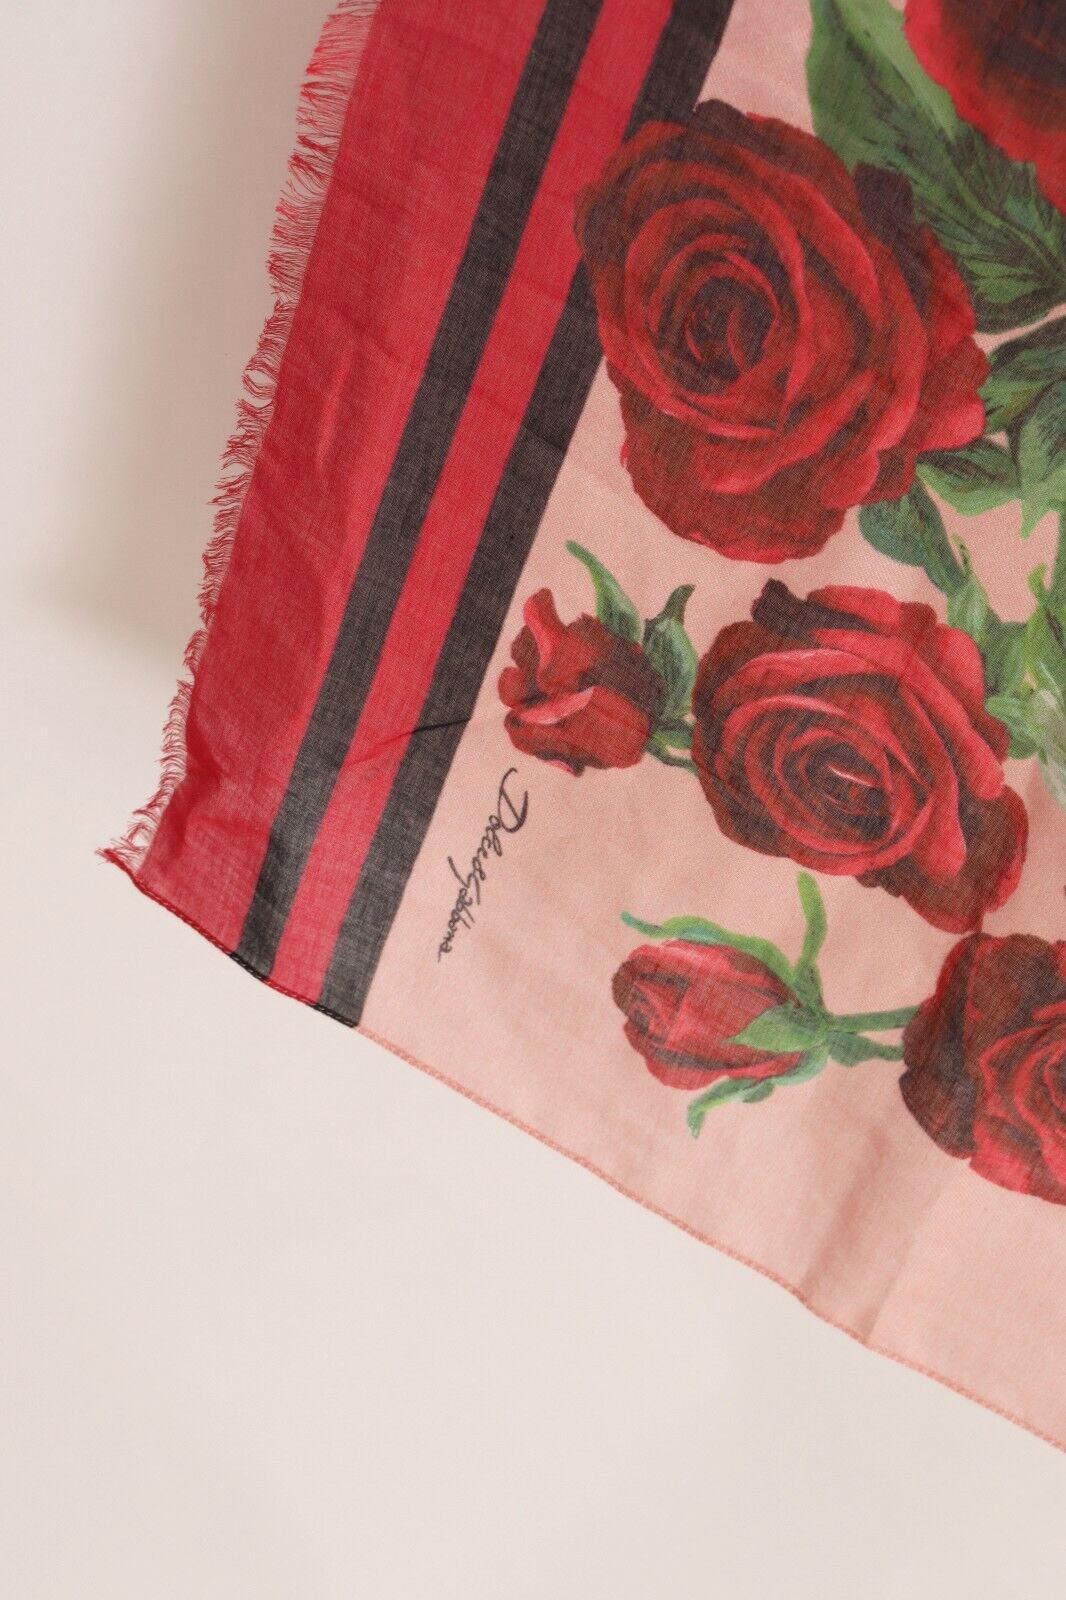 Women's Dolce & Gabbana Red Modal Cashmere Roses Floral Scarf Wrap Cover Up Italy DG For Sale